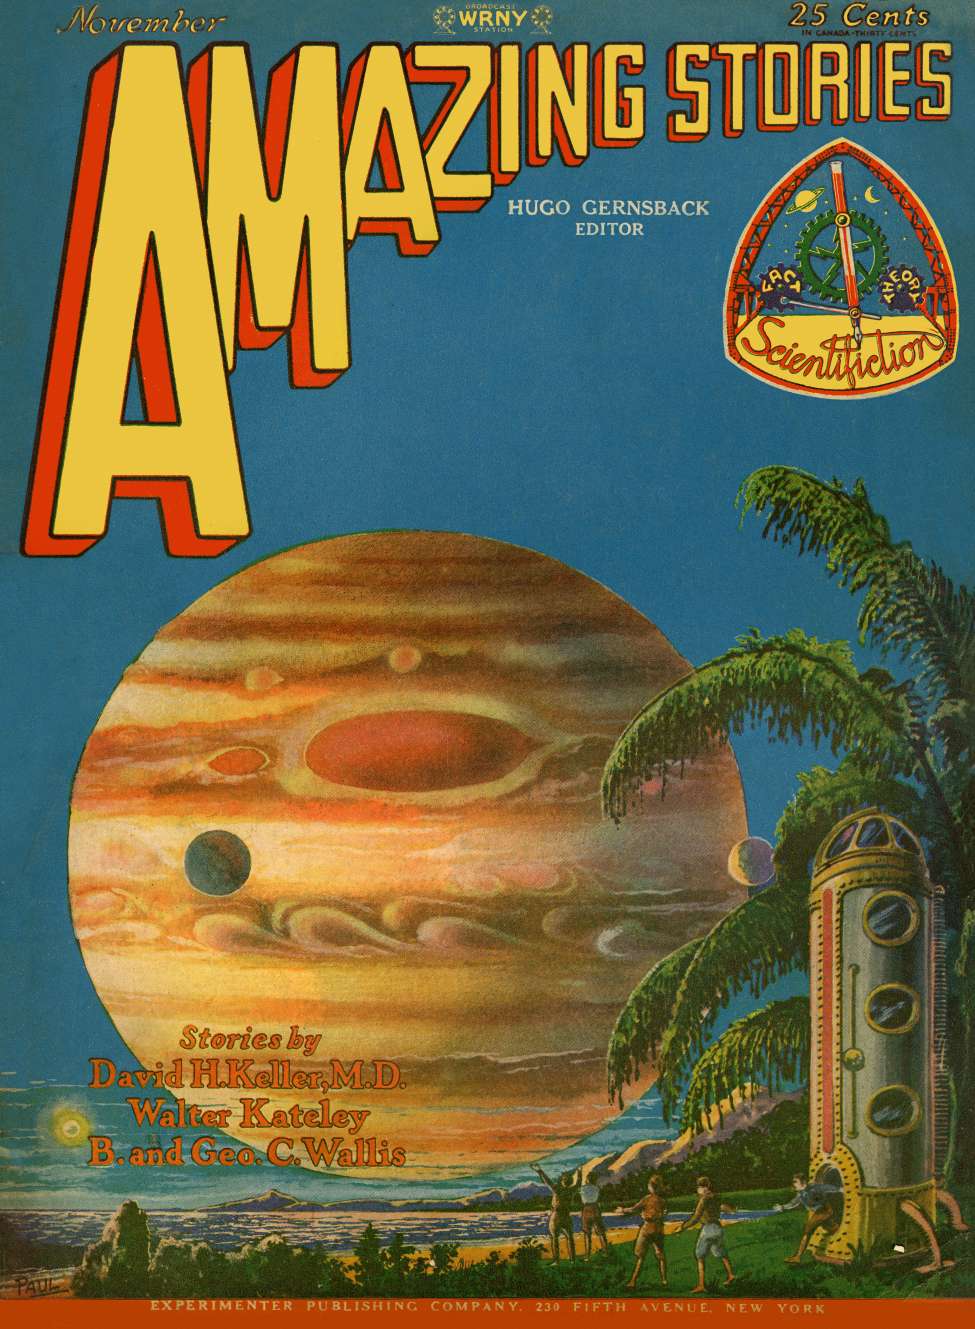 Book Cover For Amazing Stories v3 8 - The World at Bay - Frank R. Paul